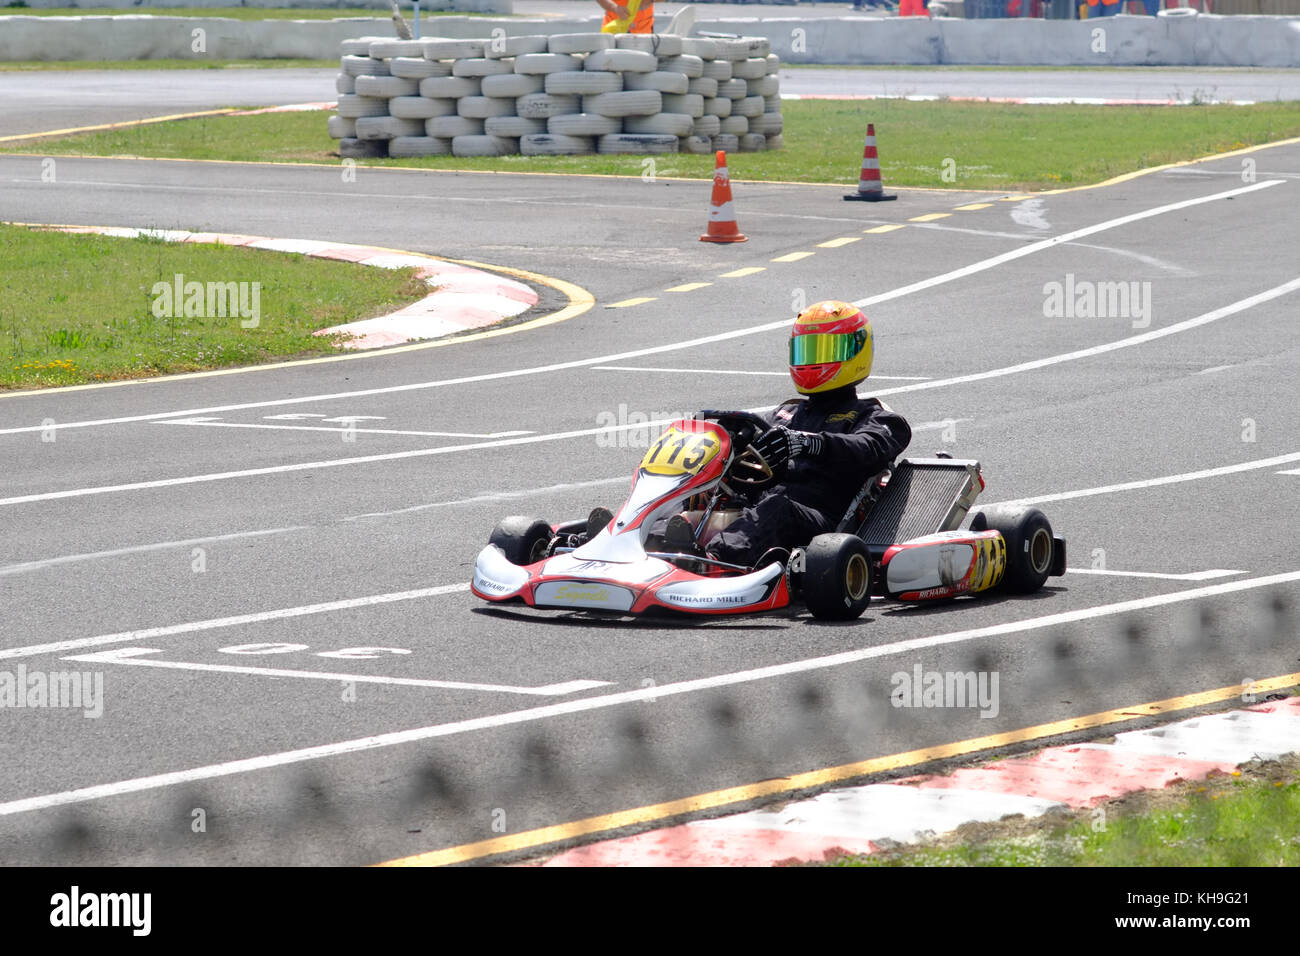 Single player competing. Gokart regional championship race. Siena Tuscany official circuit, Italy Stock Photo